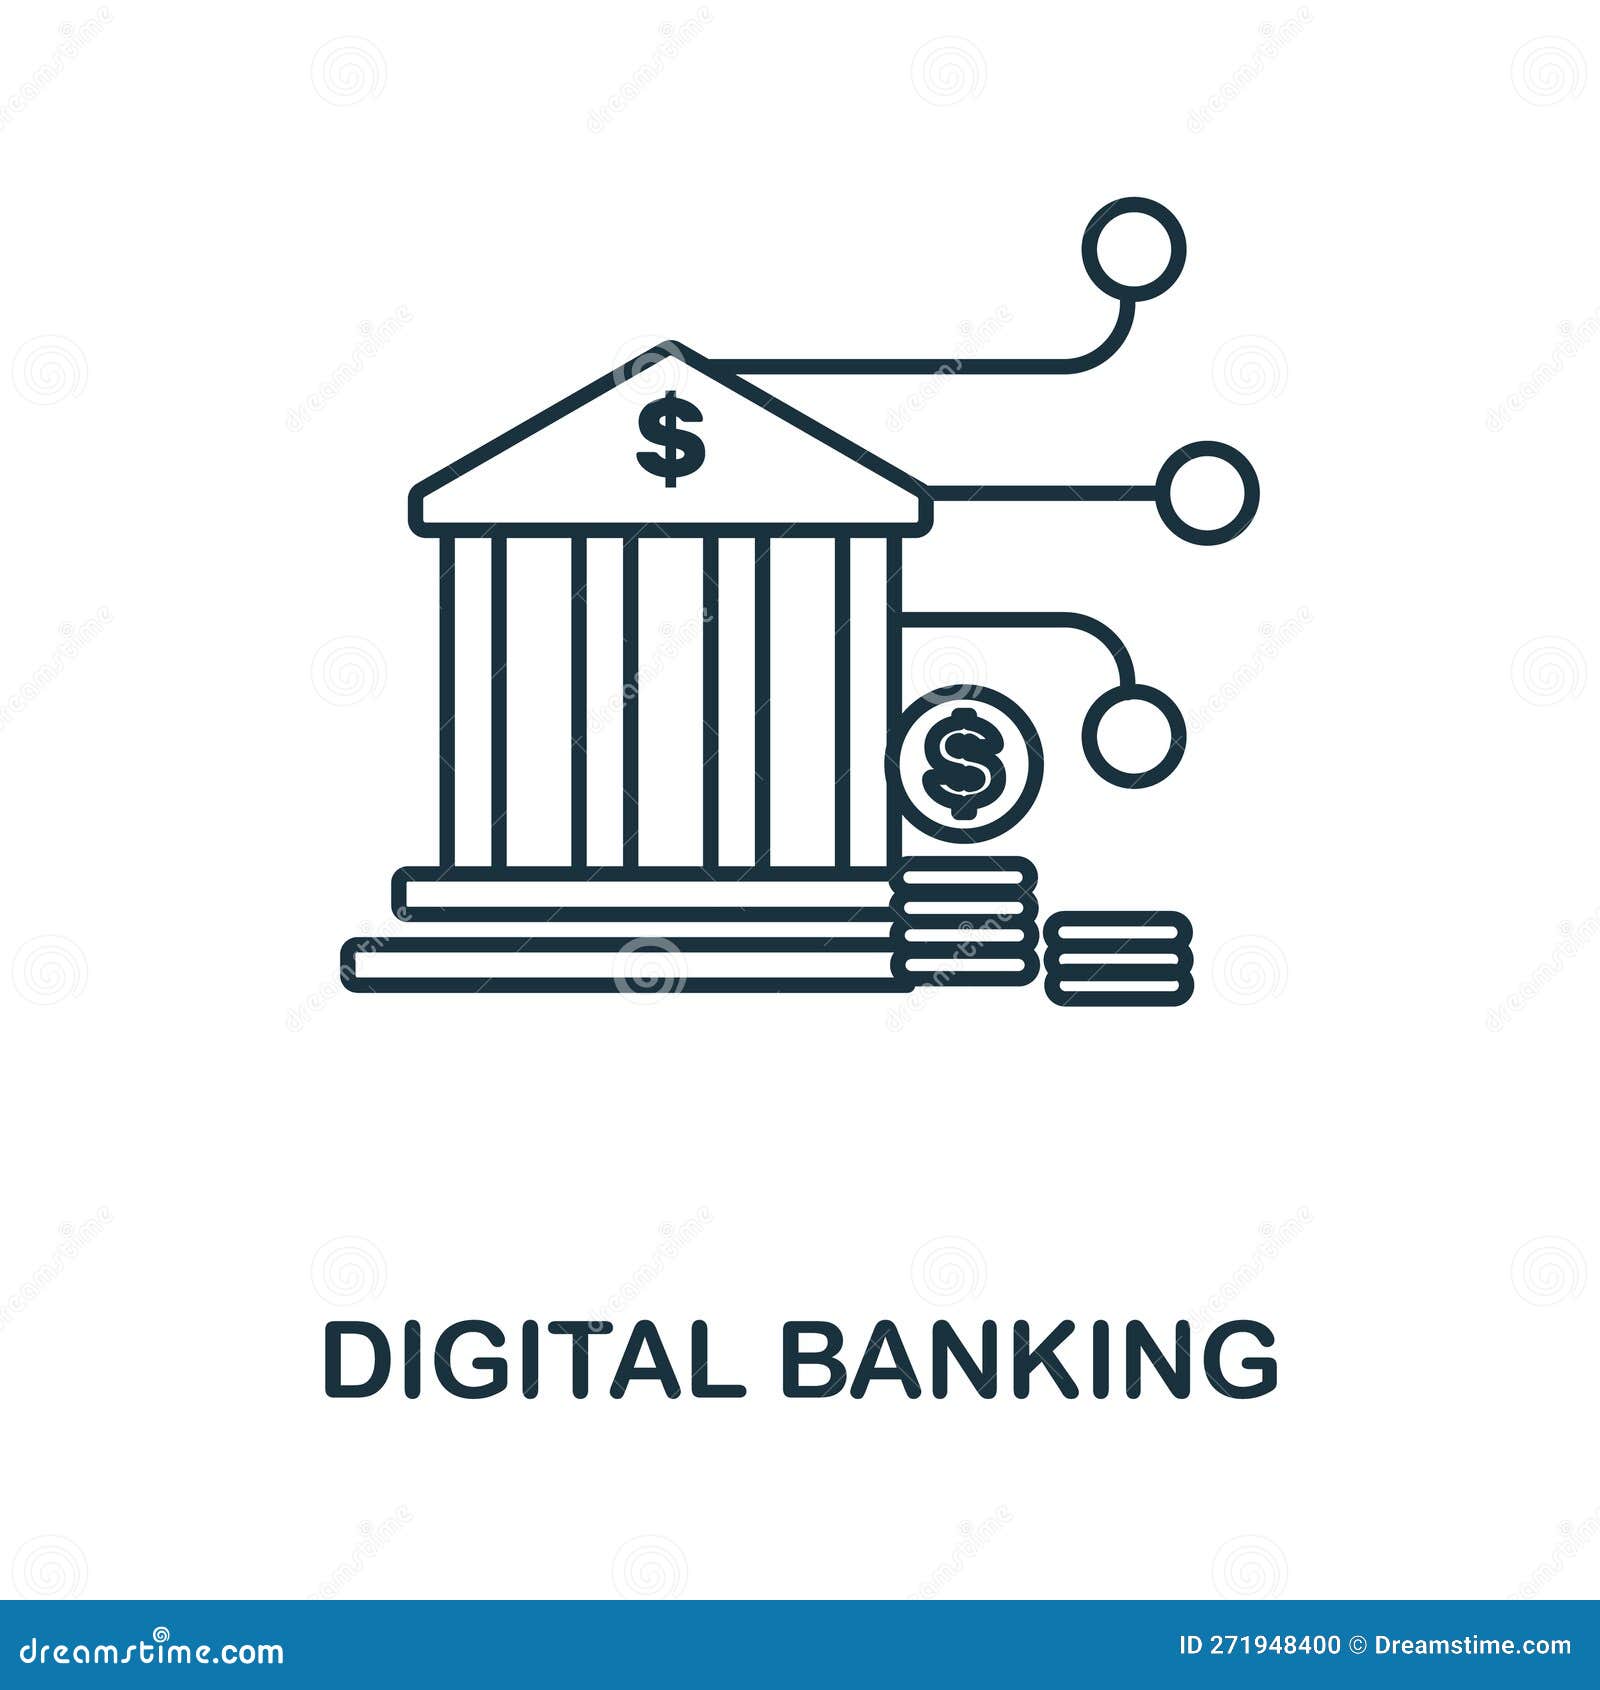 Bank line icon. Monochrome simple Bank outline icon for templates